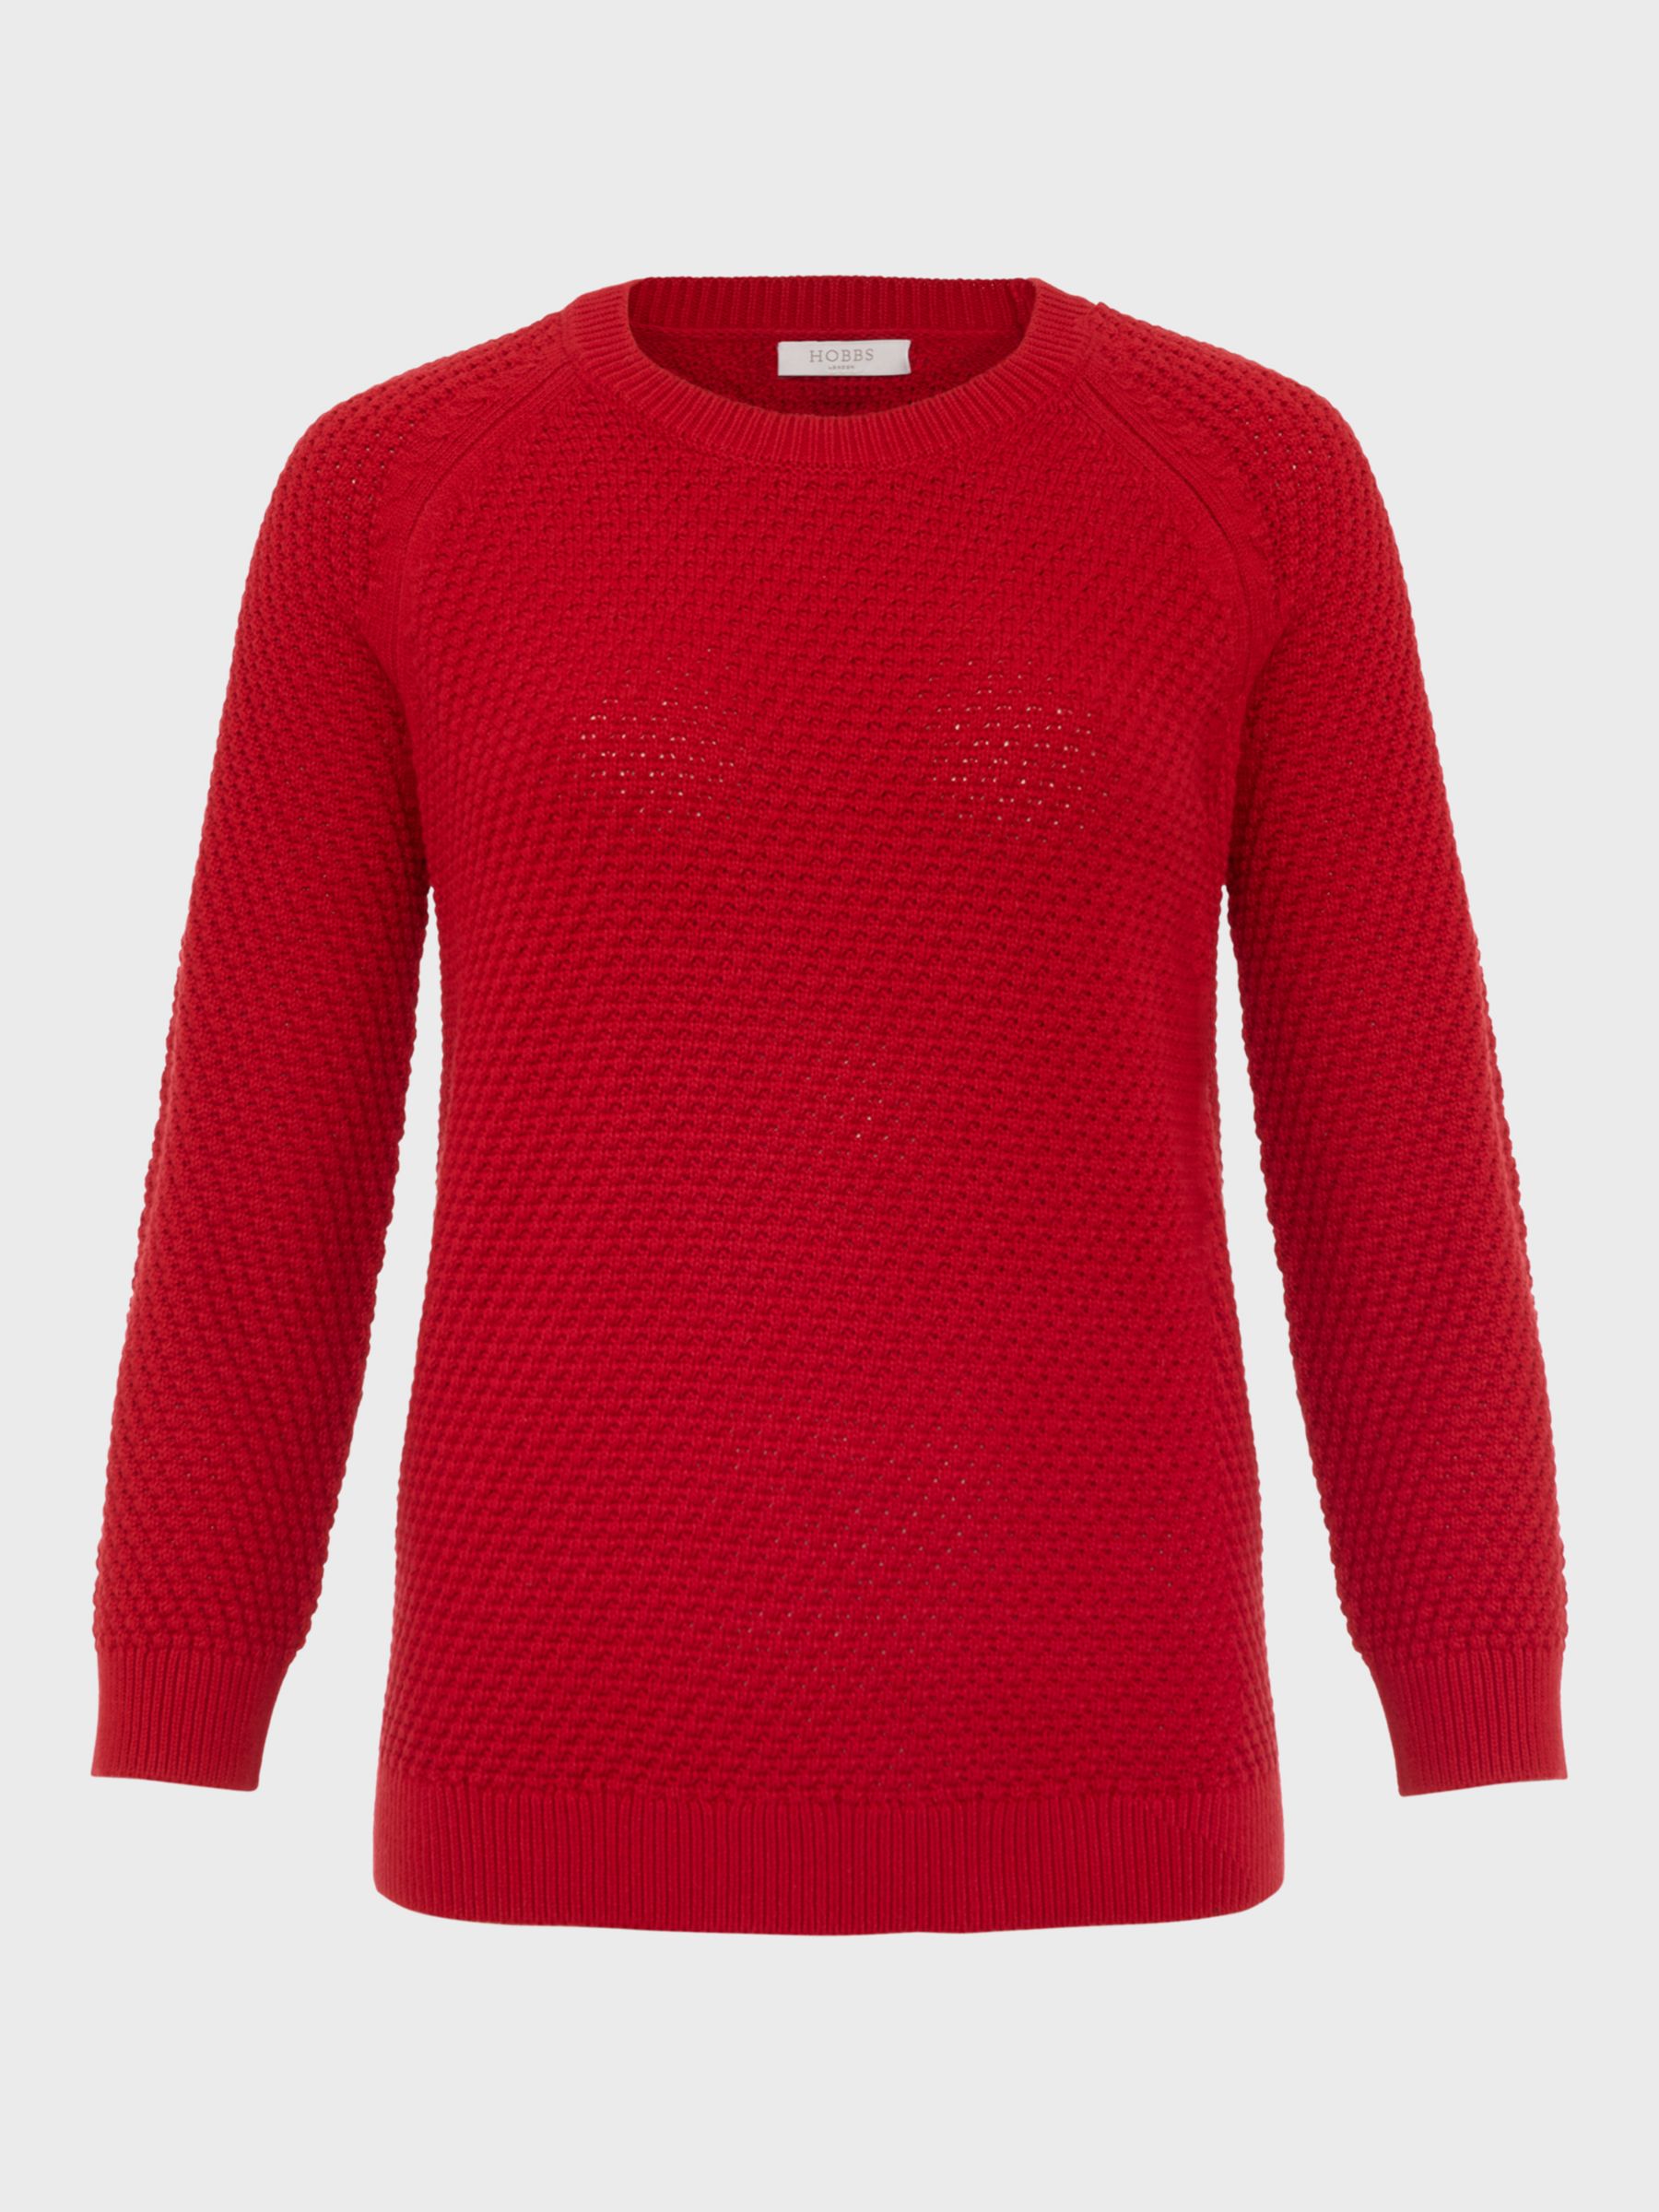 Hobbs Lucie Cotton Jumper, True Red at John Lewis & Partners